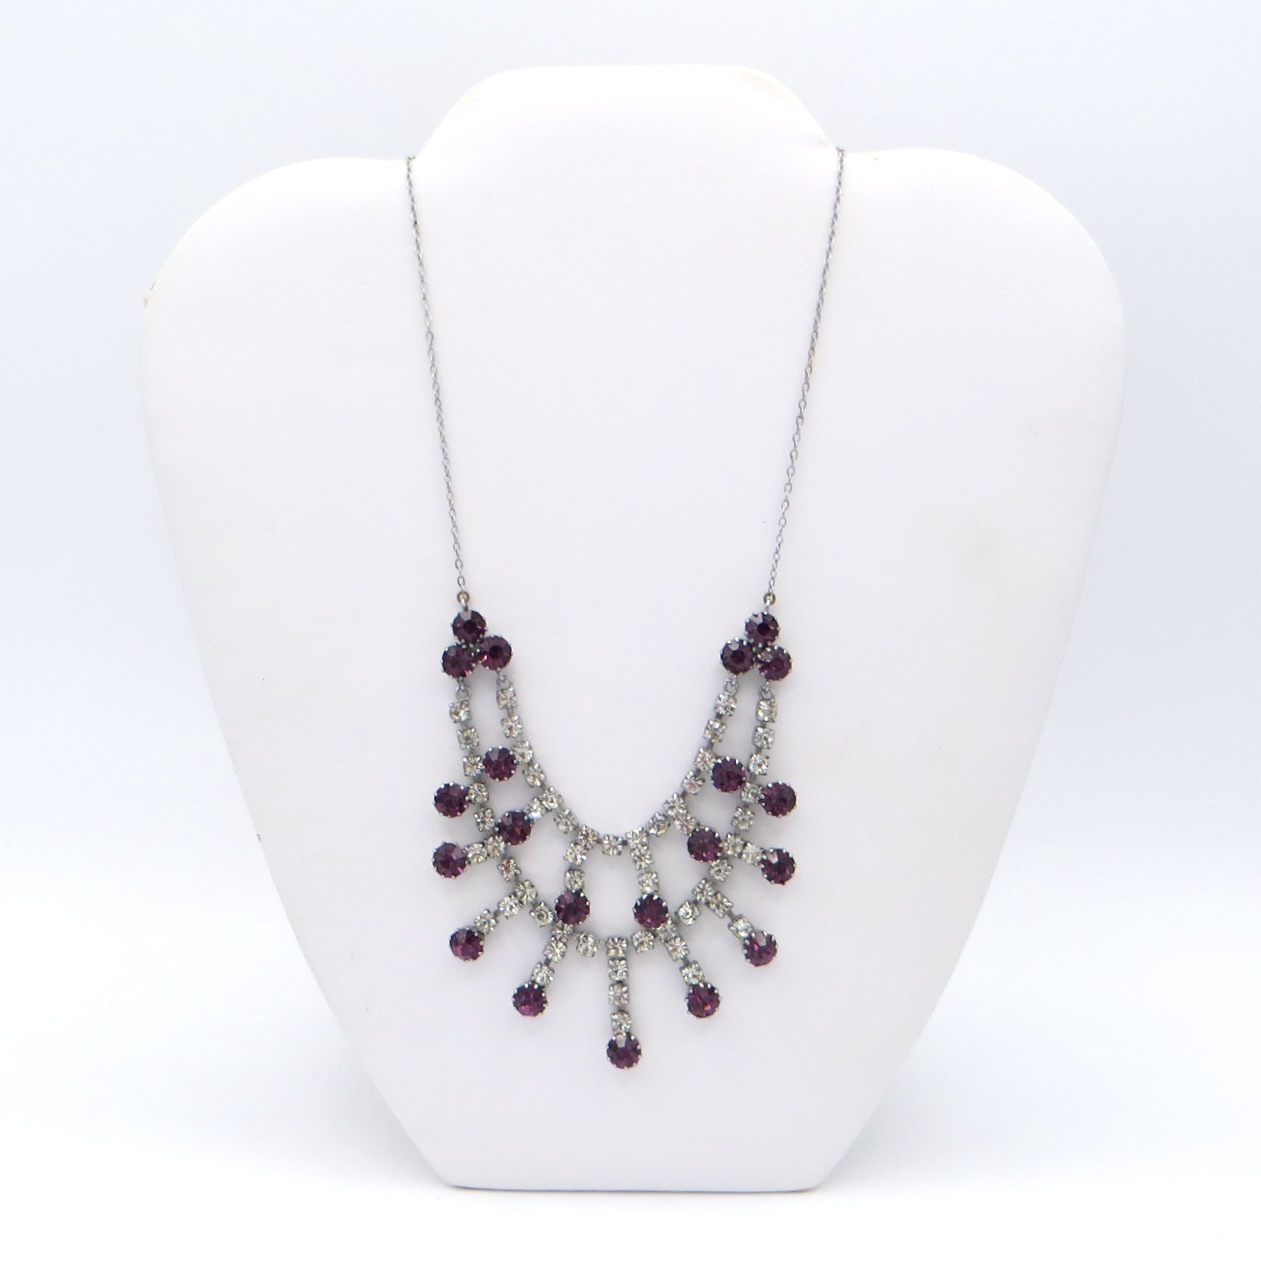 Two-Tier Necklace with Violet Stones